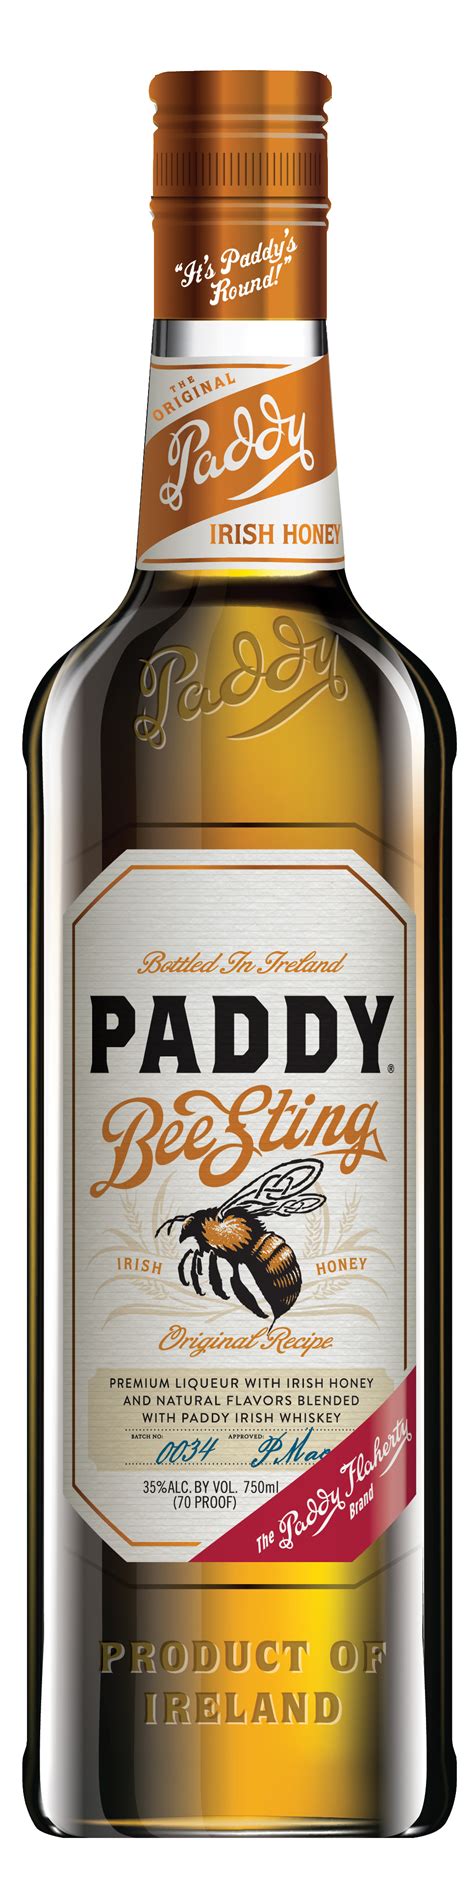 Paddy Irish Whiskey Introduces Two New Flavored Whiskeys